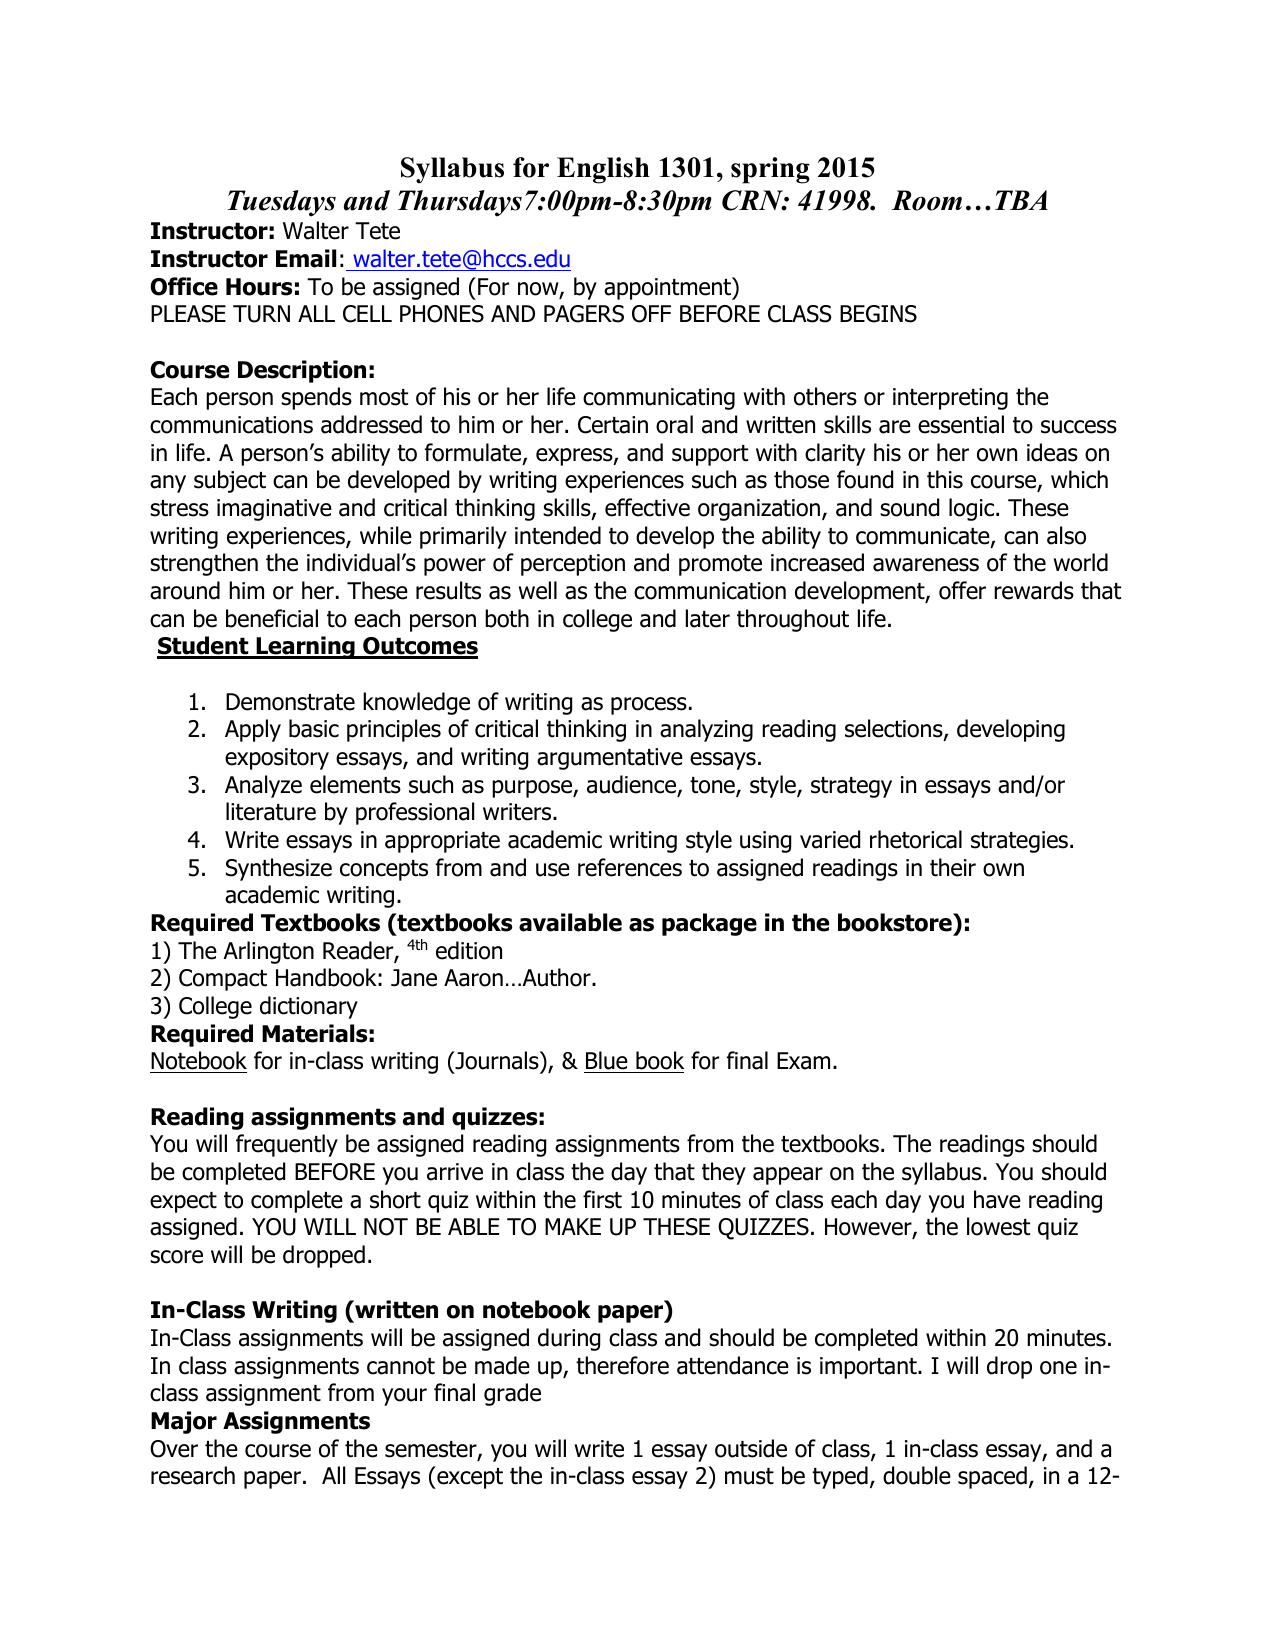 The reader resume template patent agent might need